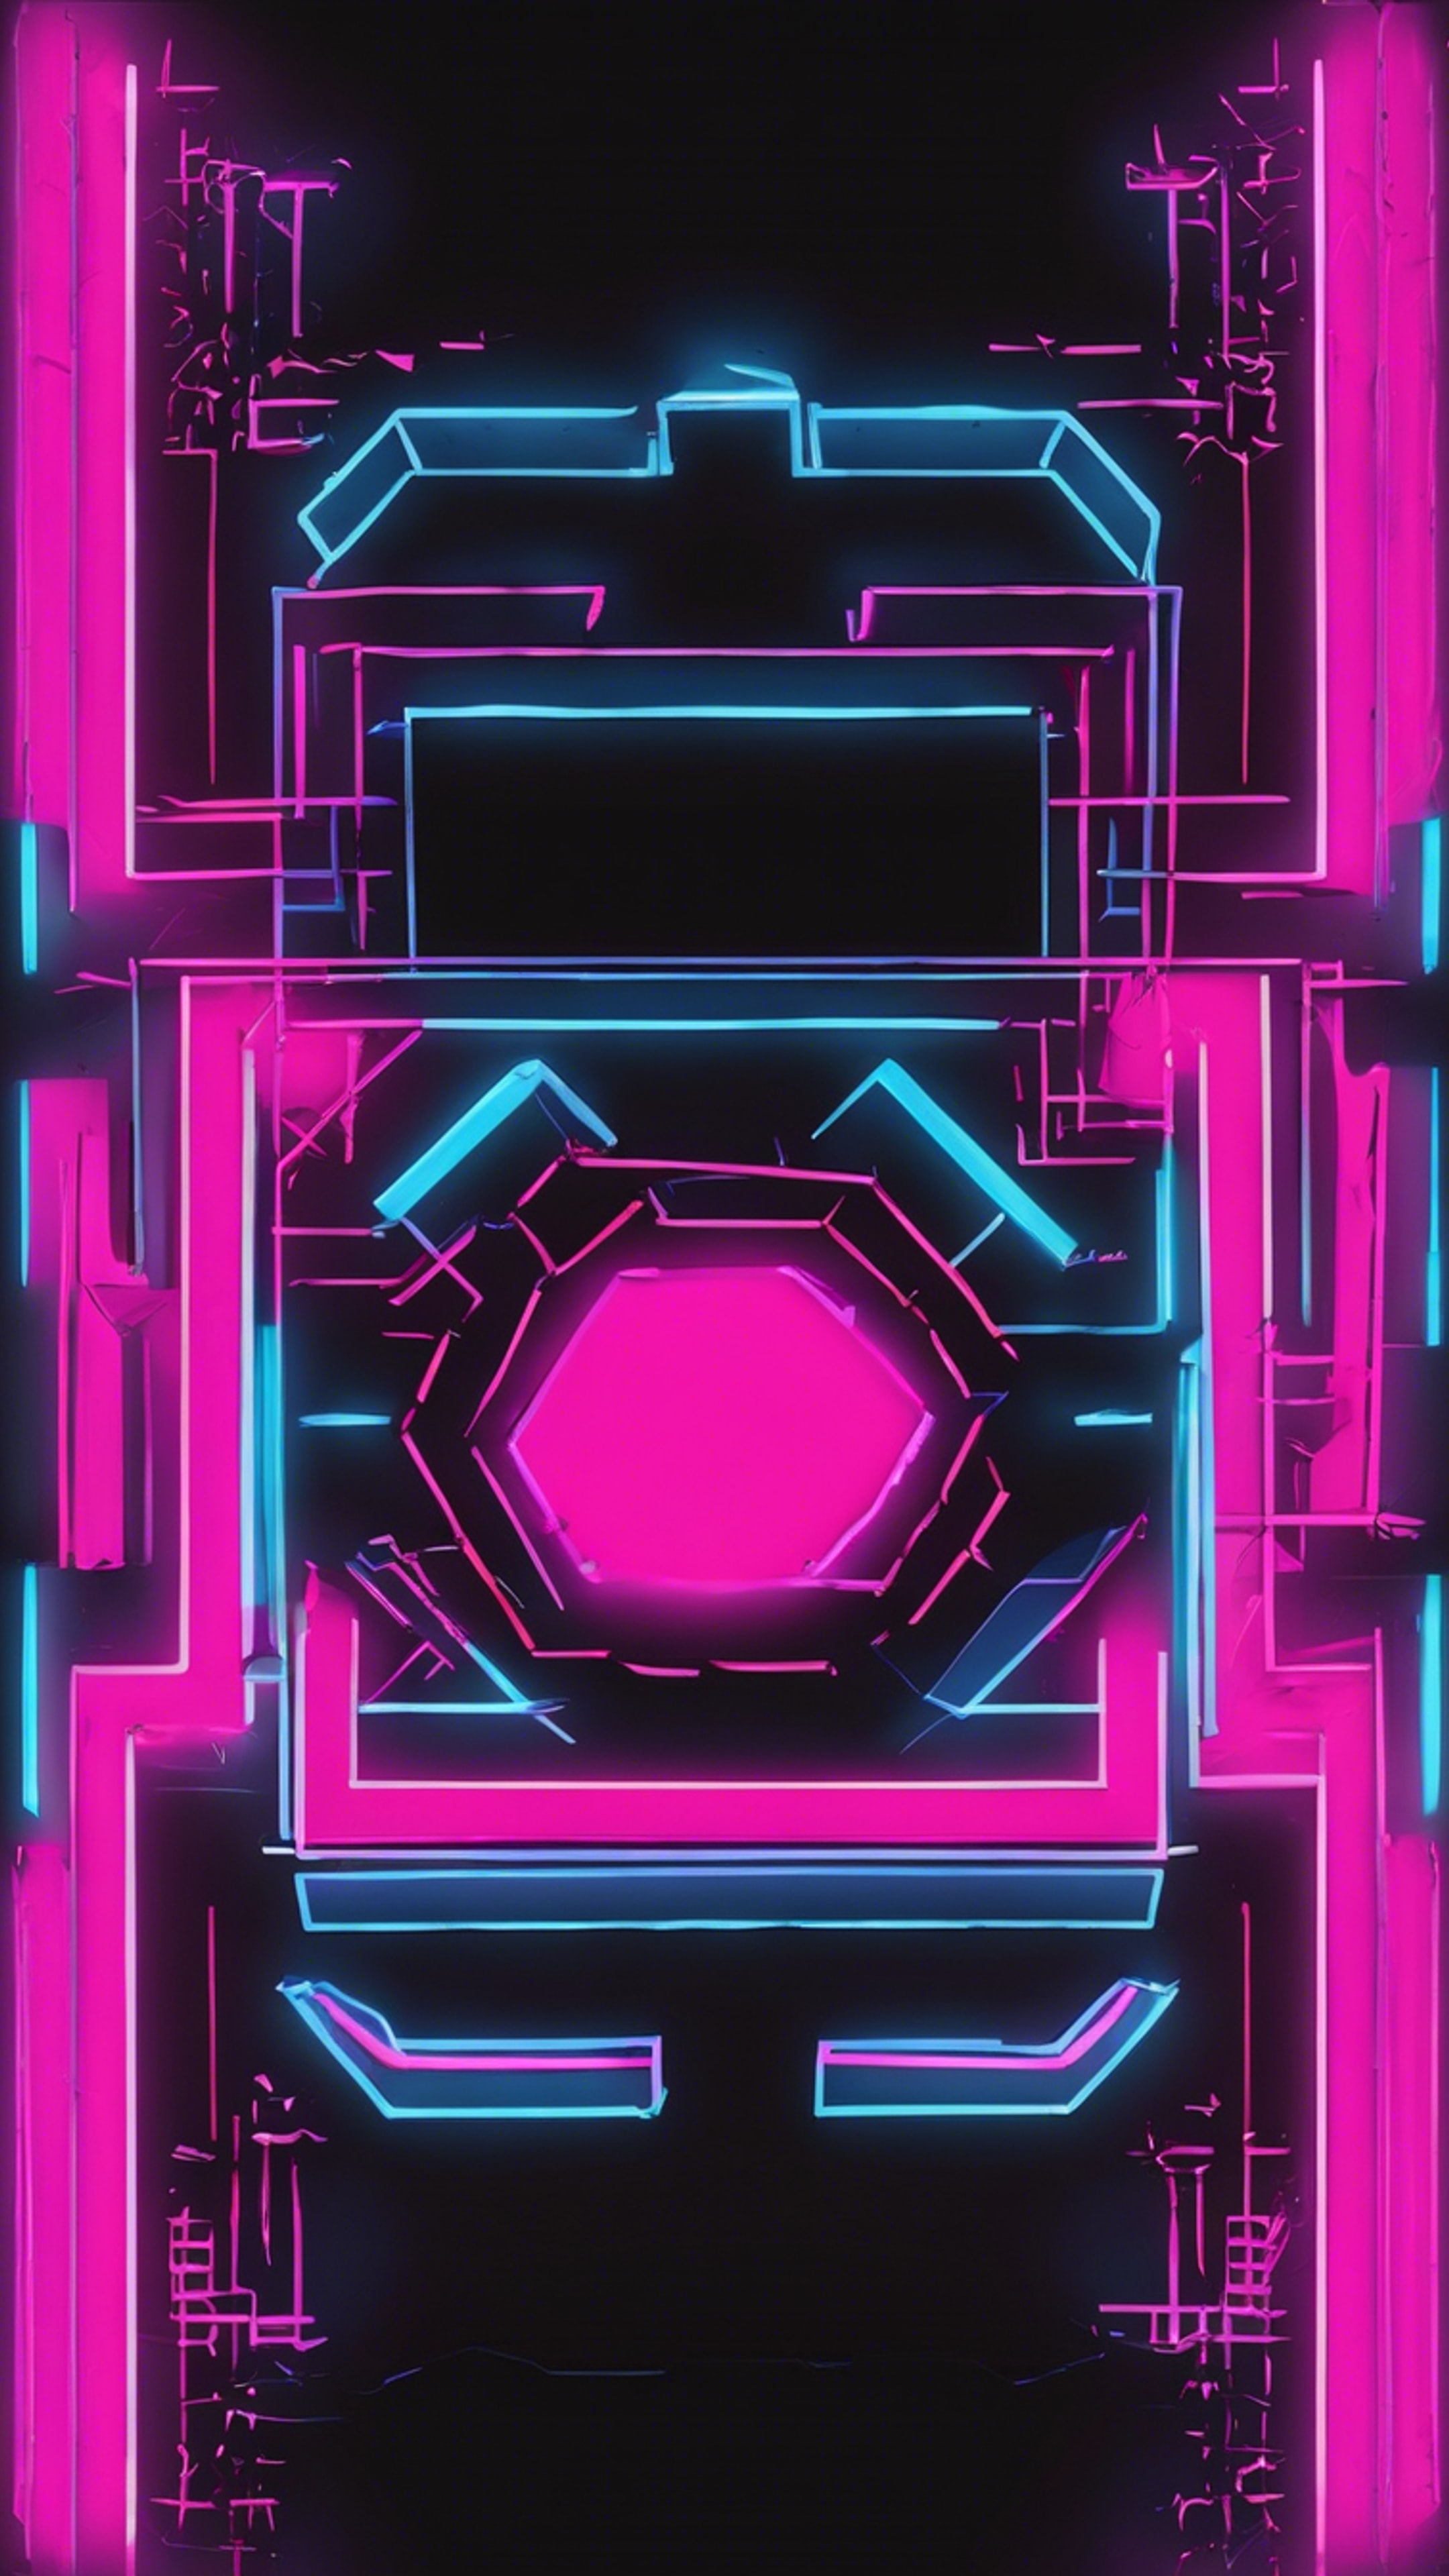 Bright neon pink and blue geometric shapes against a black background, reminiscent of 80s arcade games. Tapeta[dd42a0f55e3e425295c8]